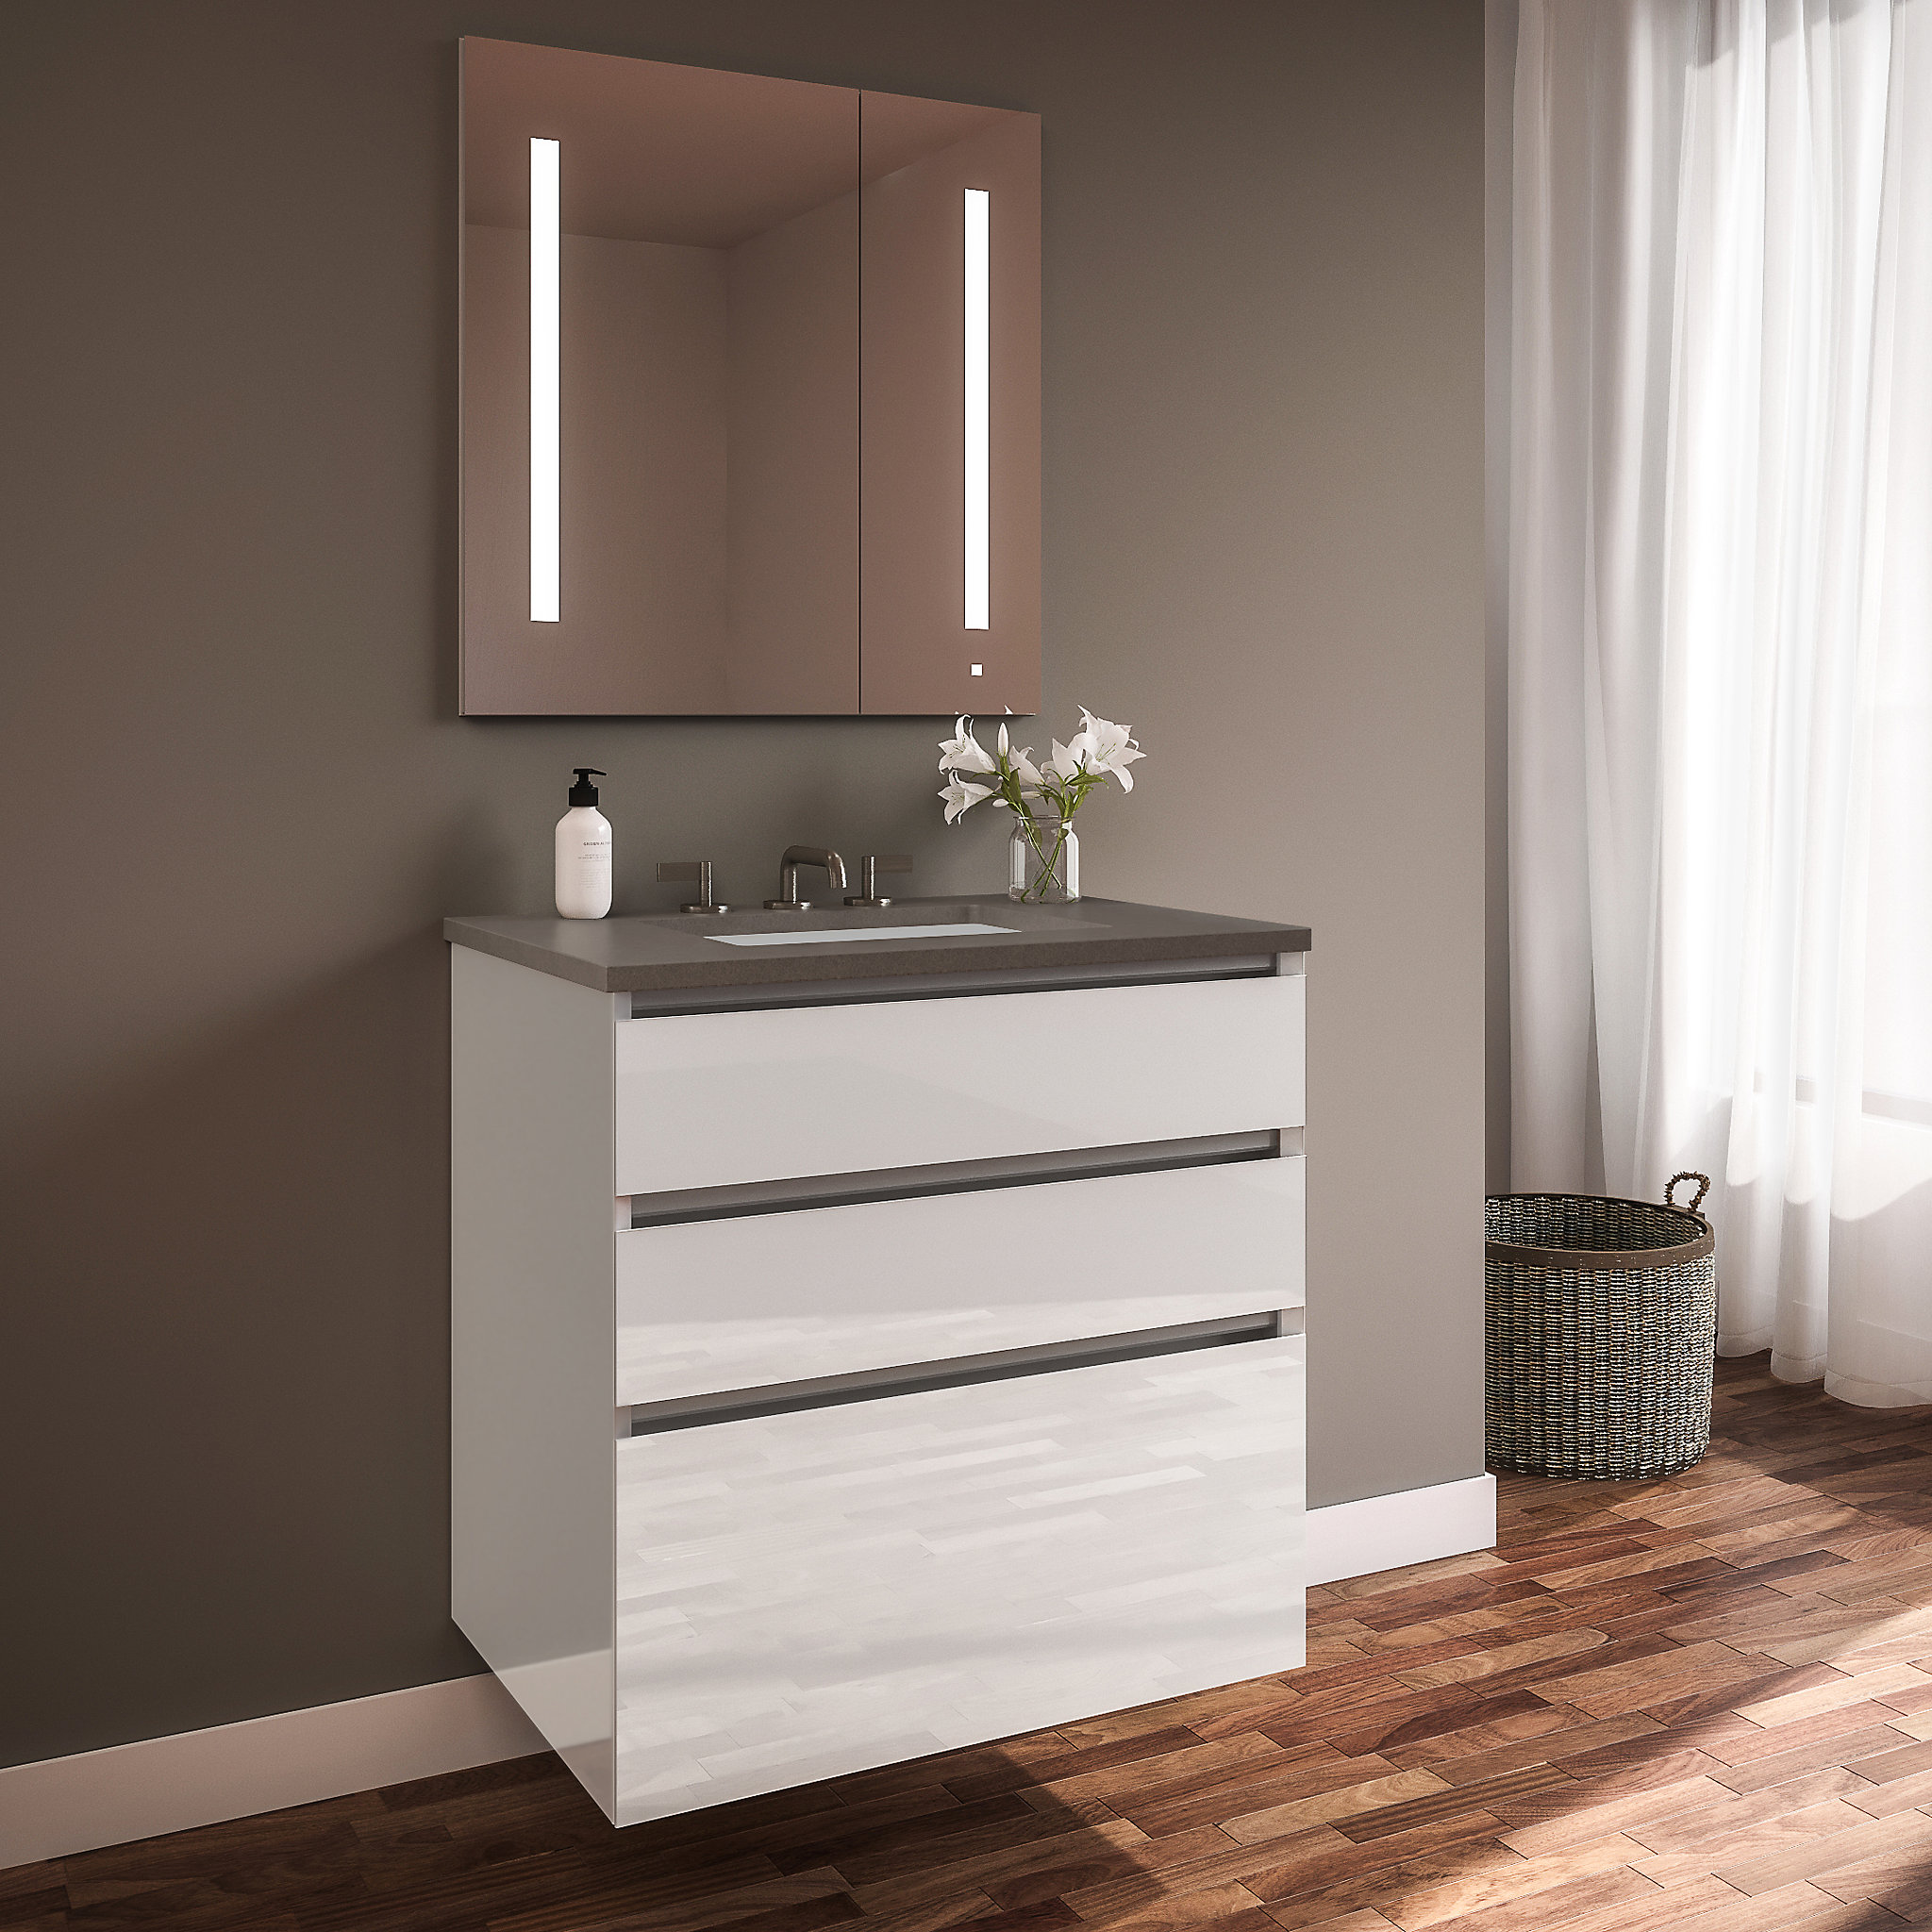 Robern 24219100NB00003 Curated Cartesian Vanity, 24" x 7-1/2" x 21", 24" x 15" x 21", Three Drawer, White Glass, Tip Out Drawer,